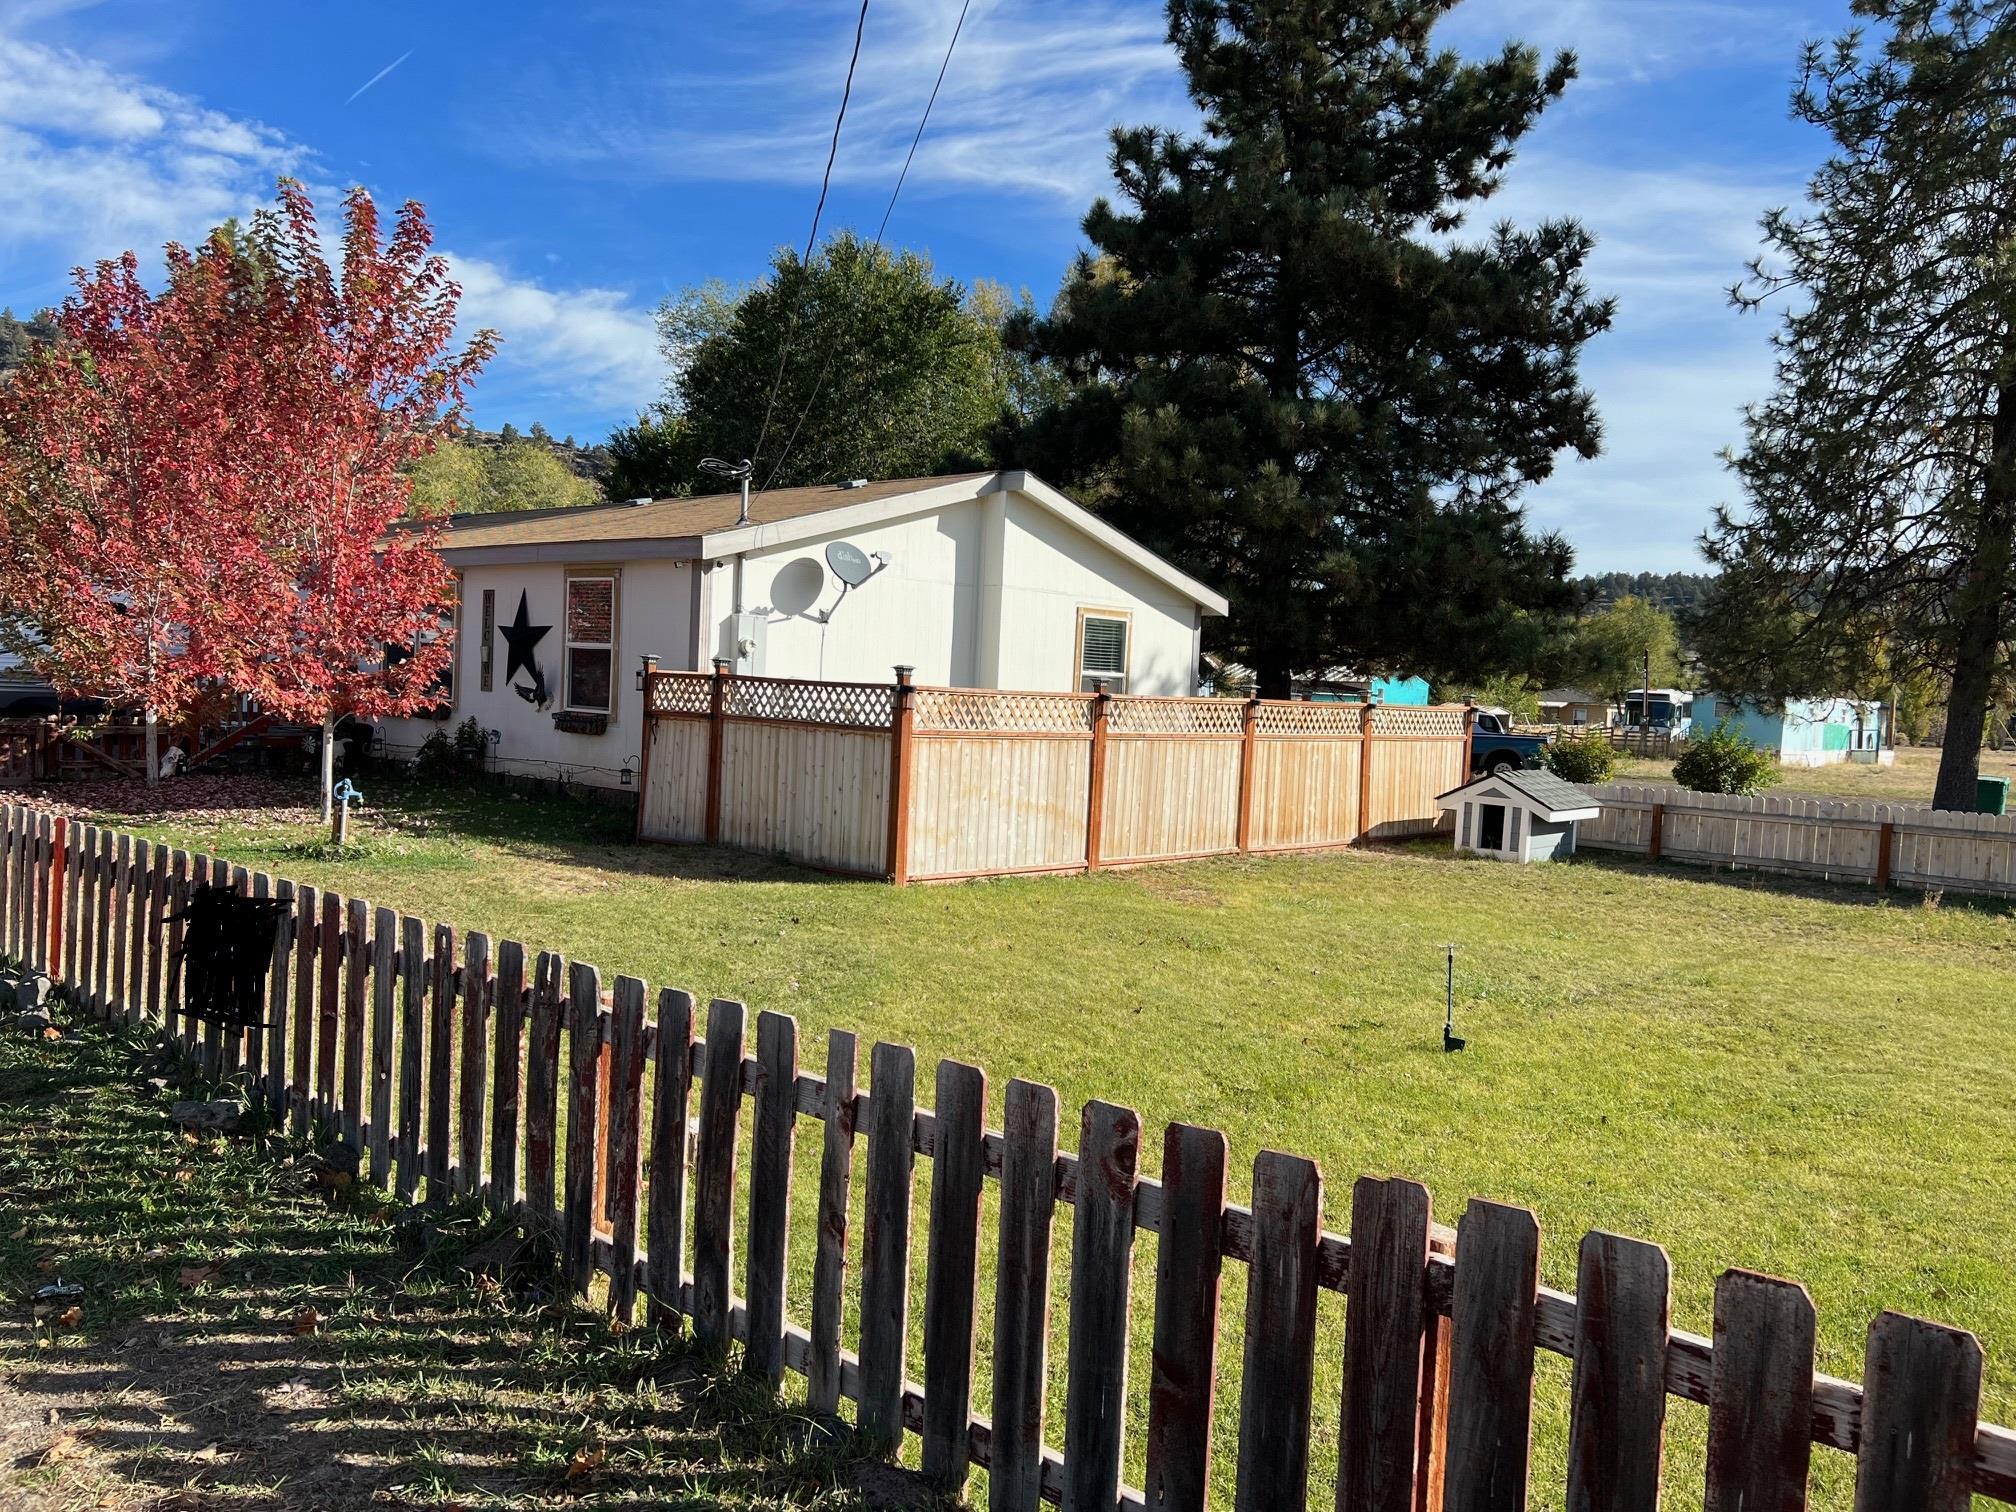 Located in the quaint town of Dorris, this 3 Bedroom 2 Bath is near grocery stores, gas station, restaurants, city hall and a motel for your visiting guests.   Dorris is just 20 miles from the larger city of Klamath Falls, Oregon for more shopping and entertainment options.